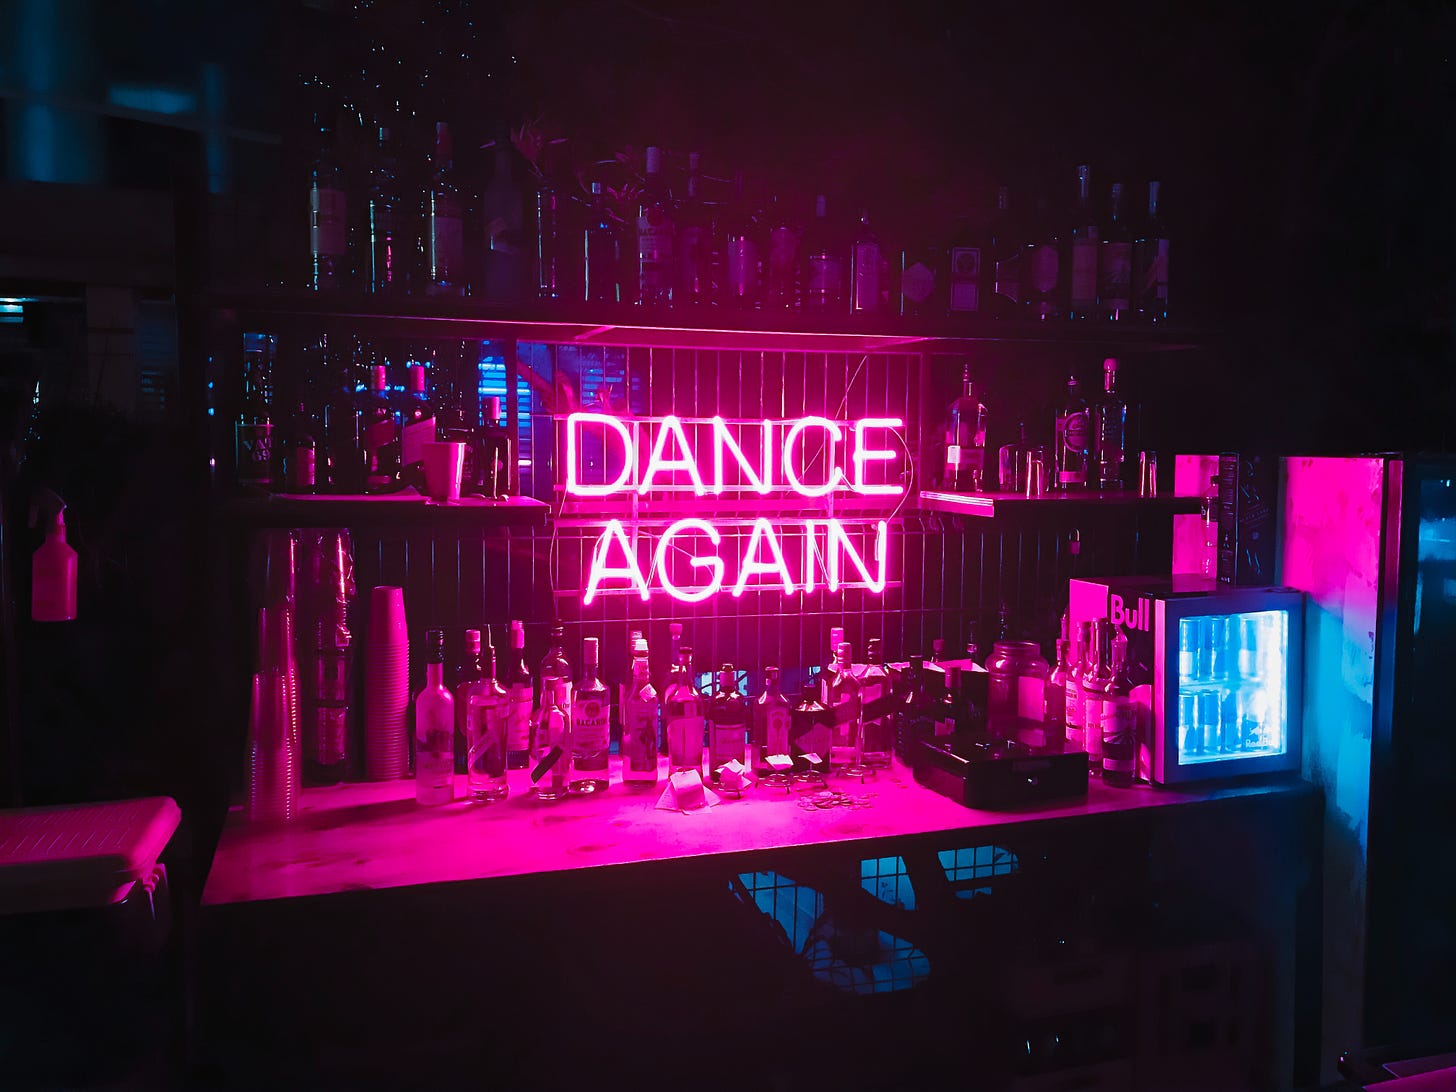 A sign in pink neon reads "Dance Again" set against a bar wall.